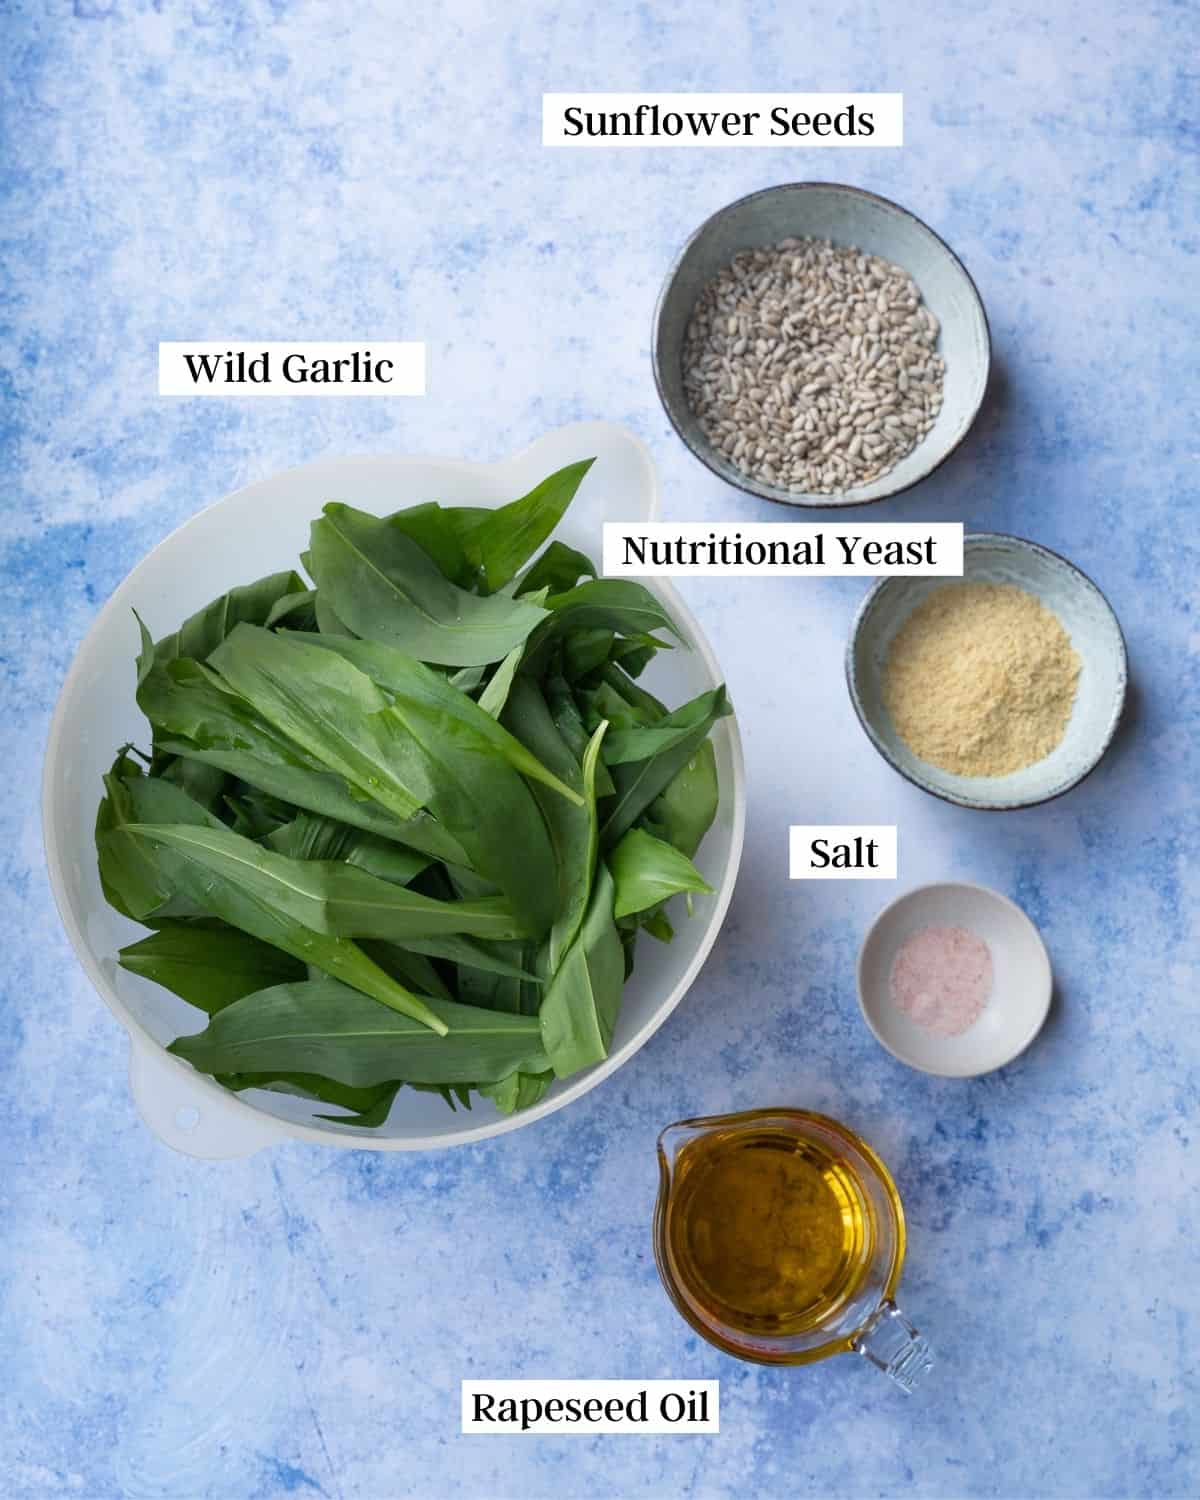 Ingredients for wild garlic pest on a light blue surface.